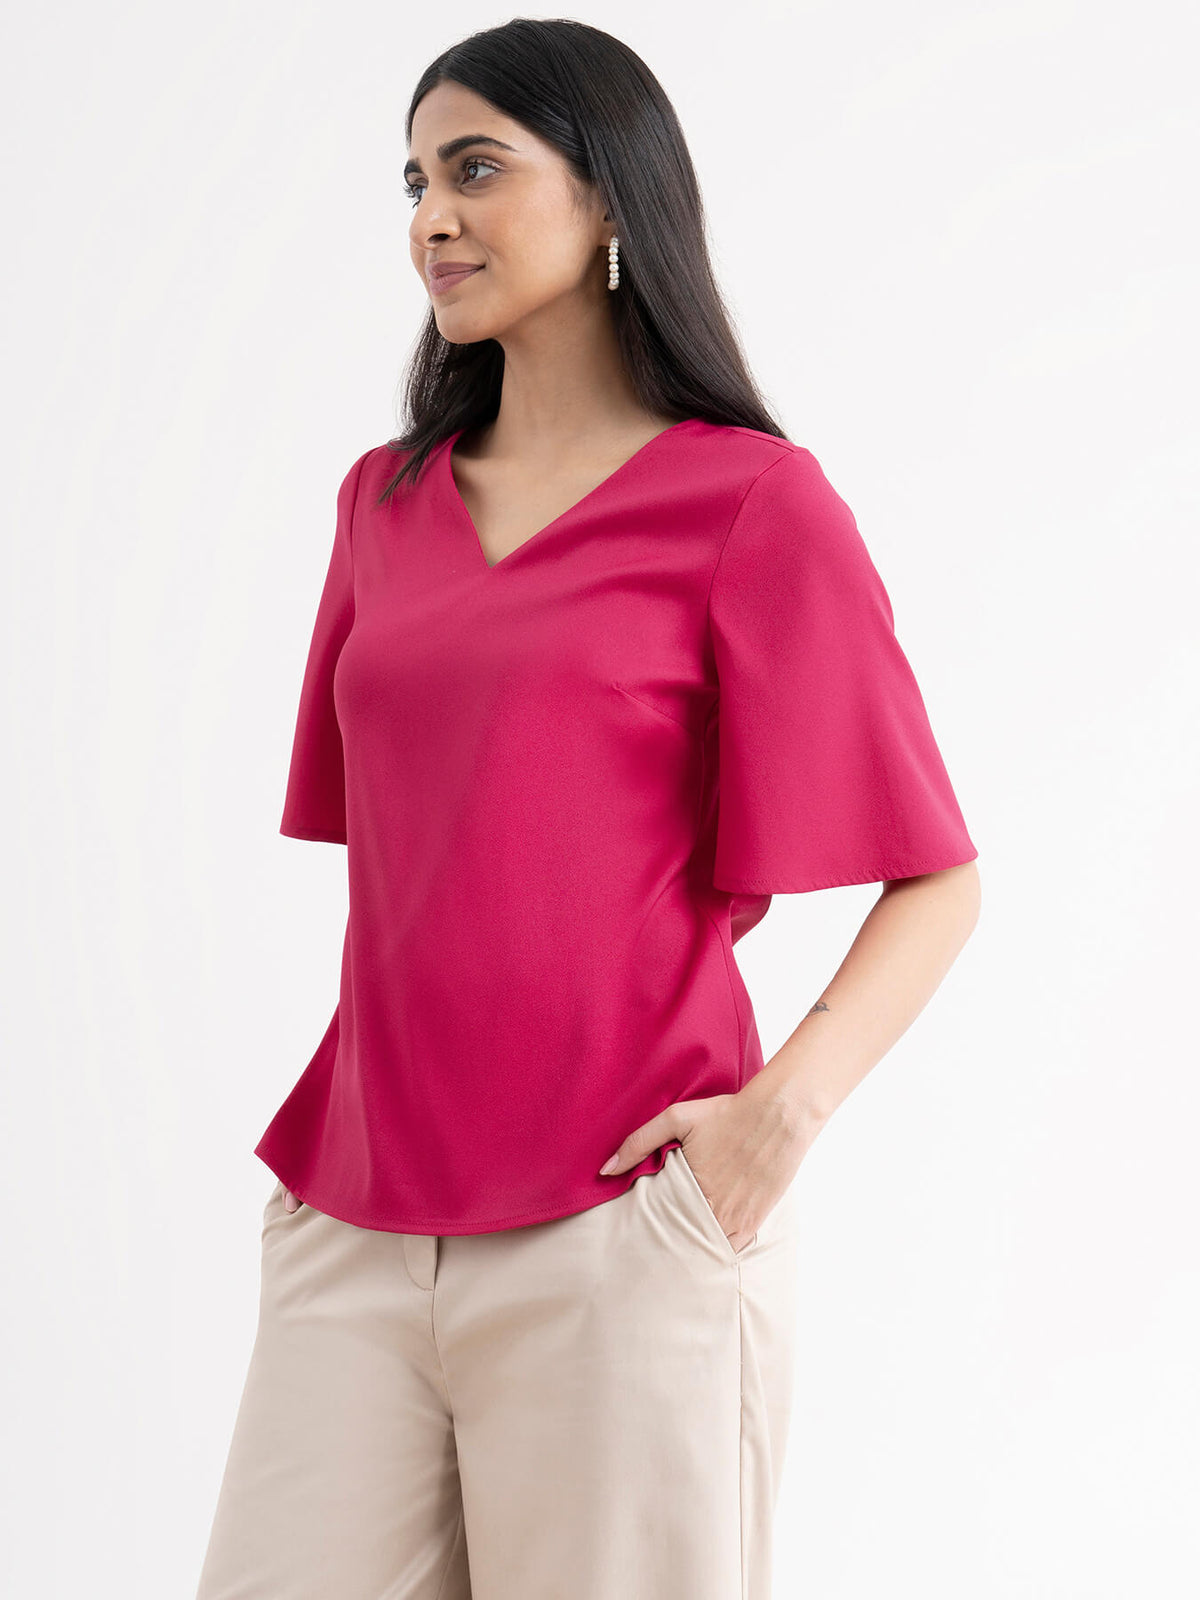 Bell Sleeves Top - Fuchsia| Formal Tops